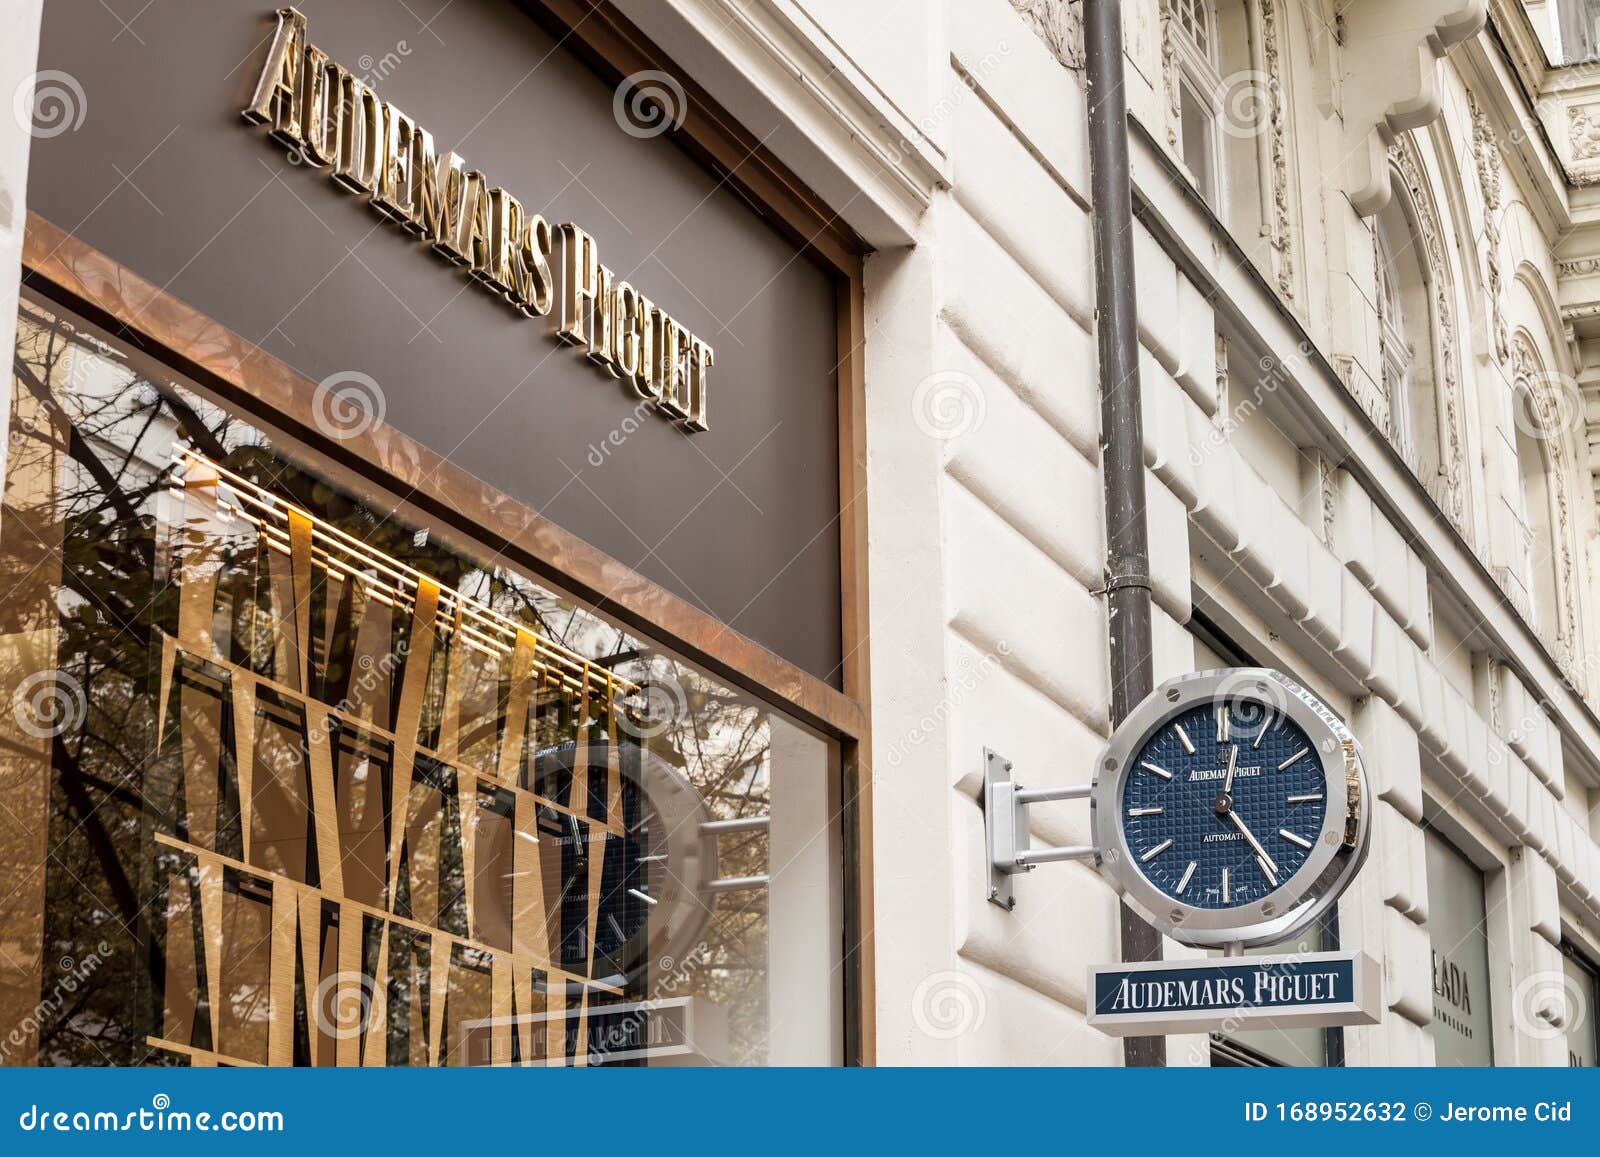 Audemars Piguet Photos Free Royalty Free Stock Photos From Dreamstime